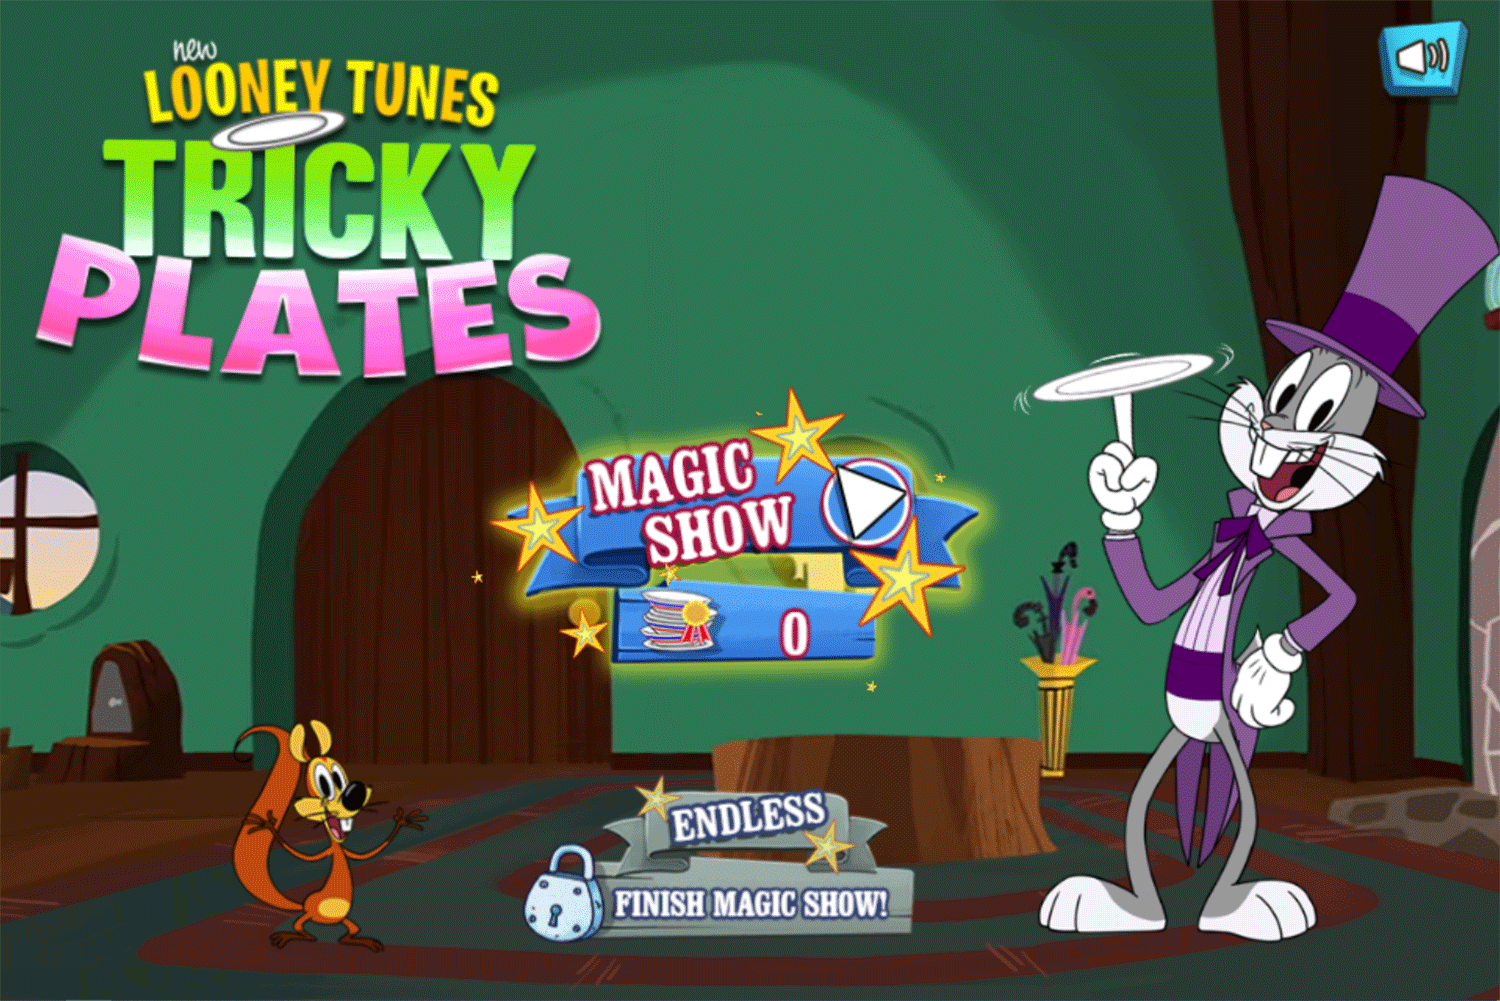 New Looney Tunes Tricky Plates Game Welcome Screen Screenshot.